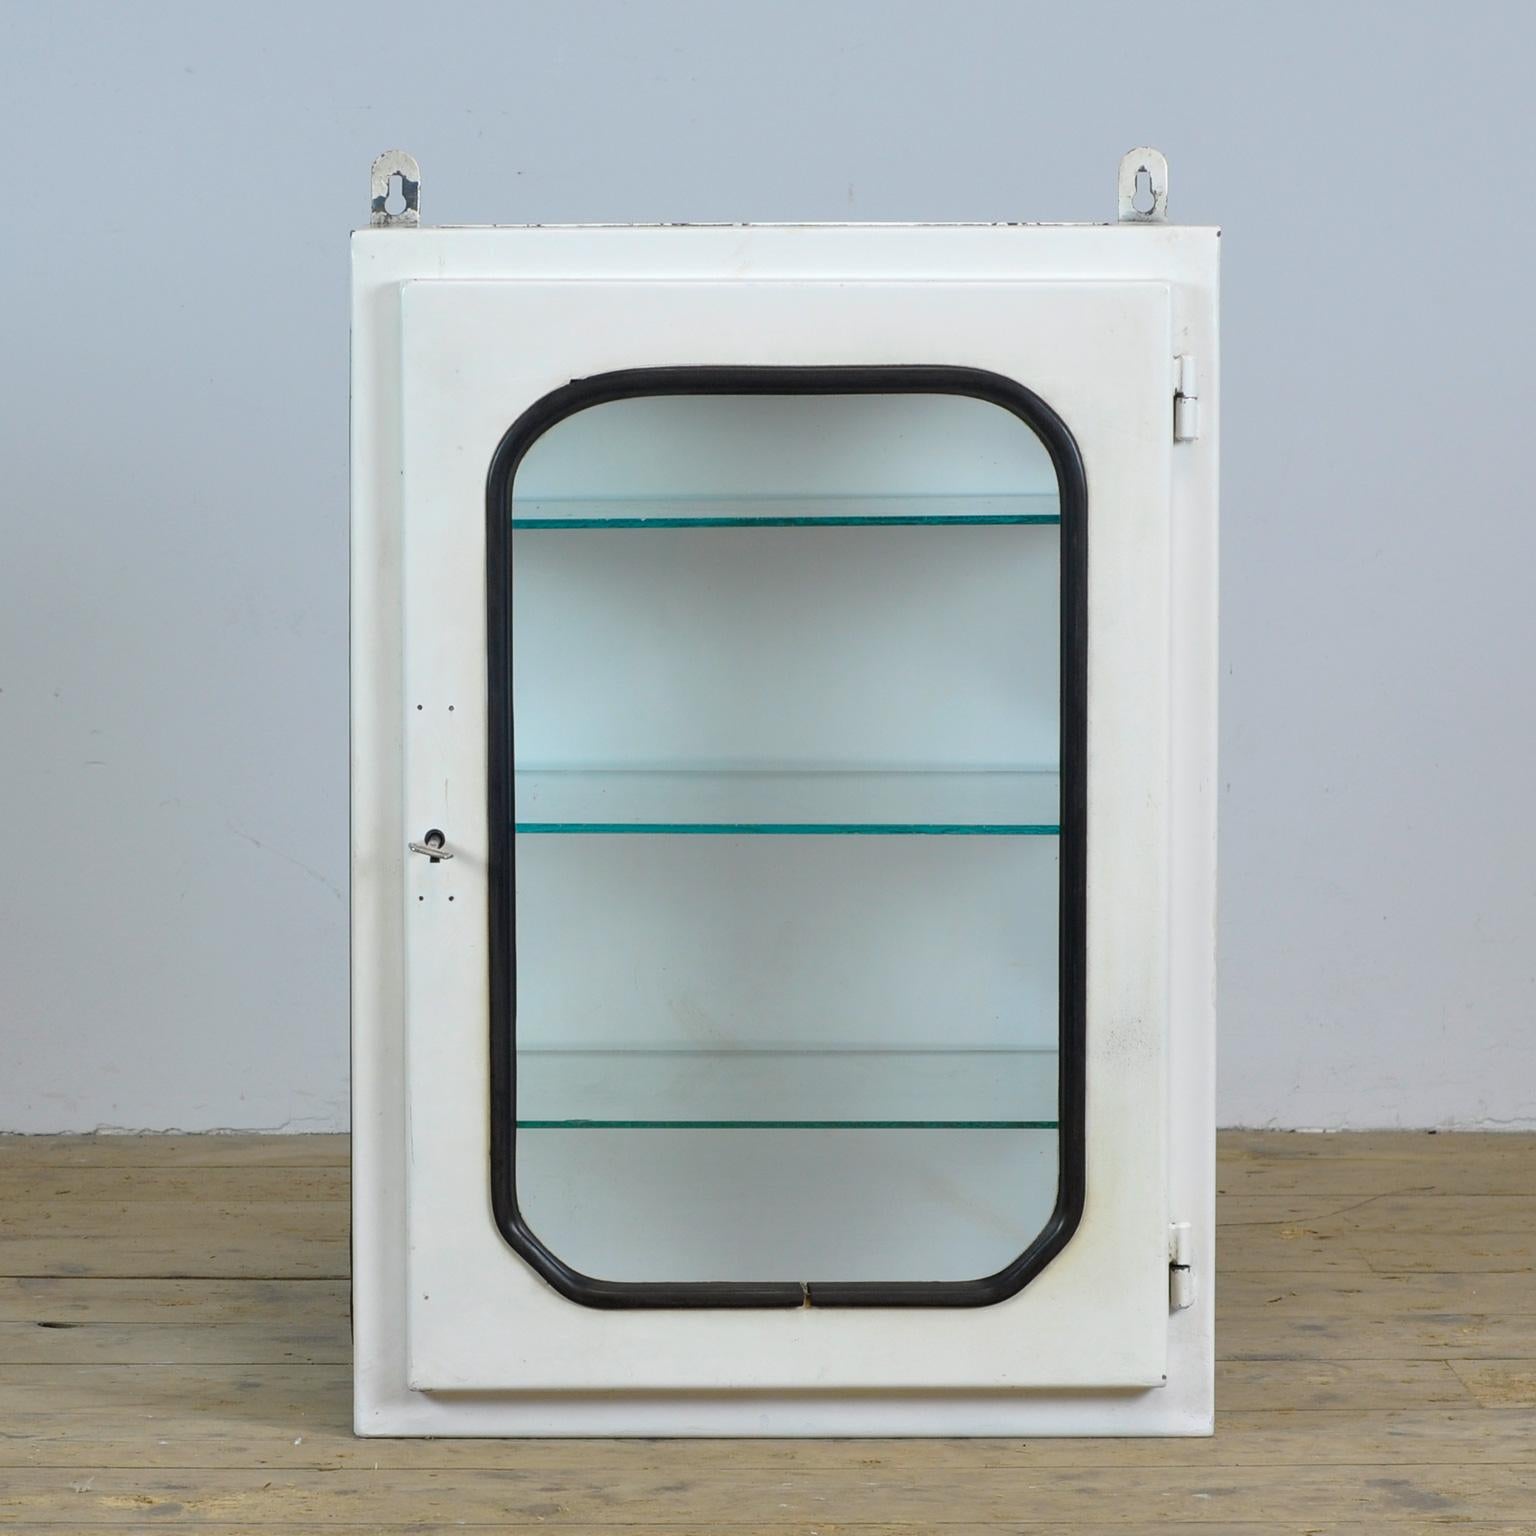 This medical cabinet was designed in the 1970s and produced circa 1975 in hungary. It was used in a hospital in budapest. It is made of iron and glass. The glass is held by a black rubber strip. The cabinet comes with three adjustable glass shelves.